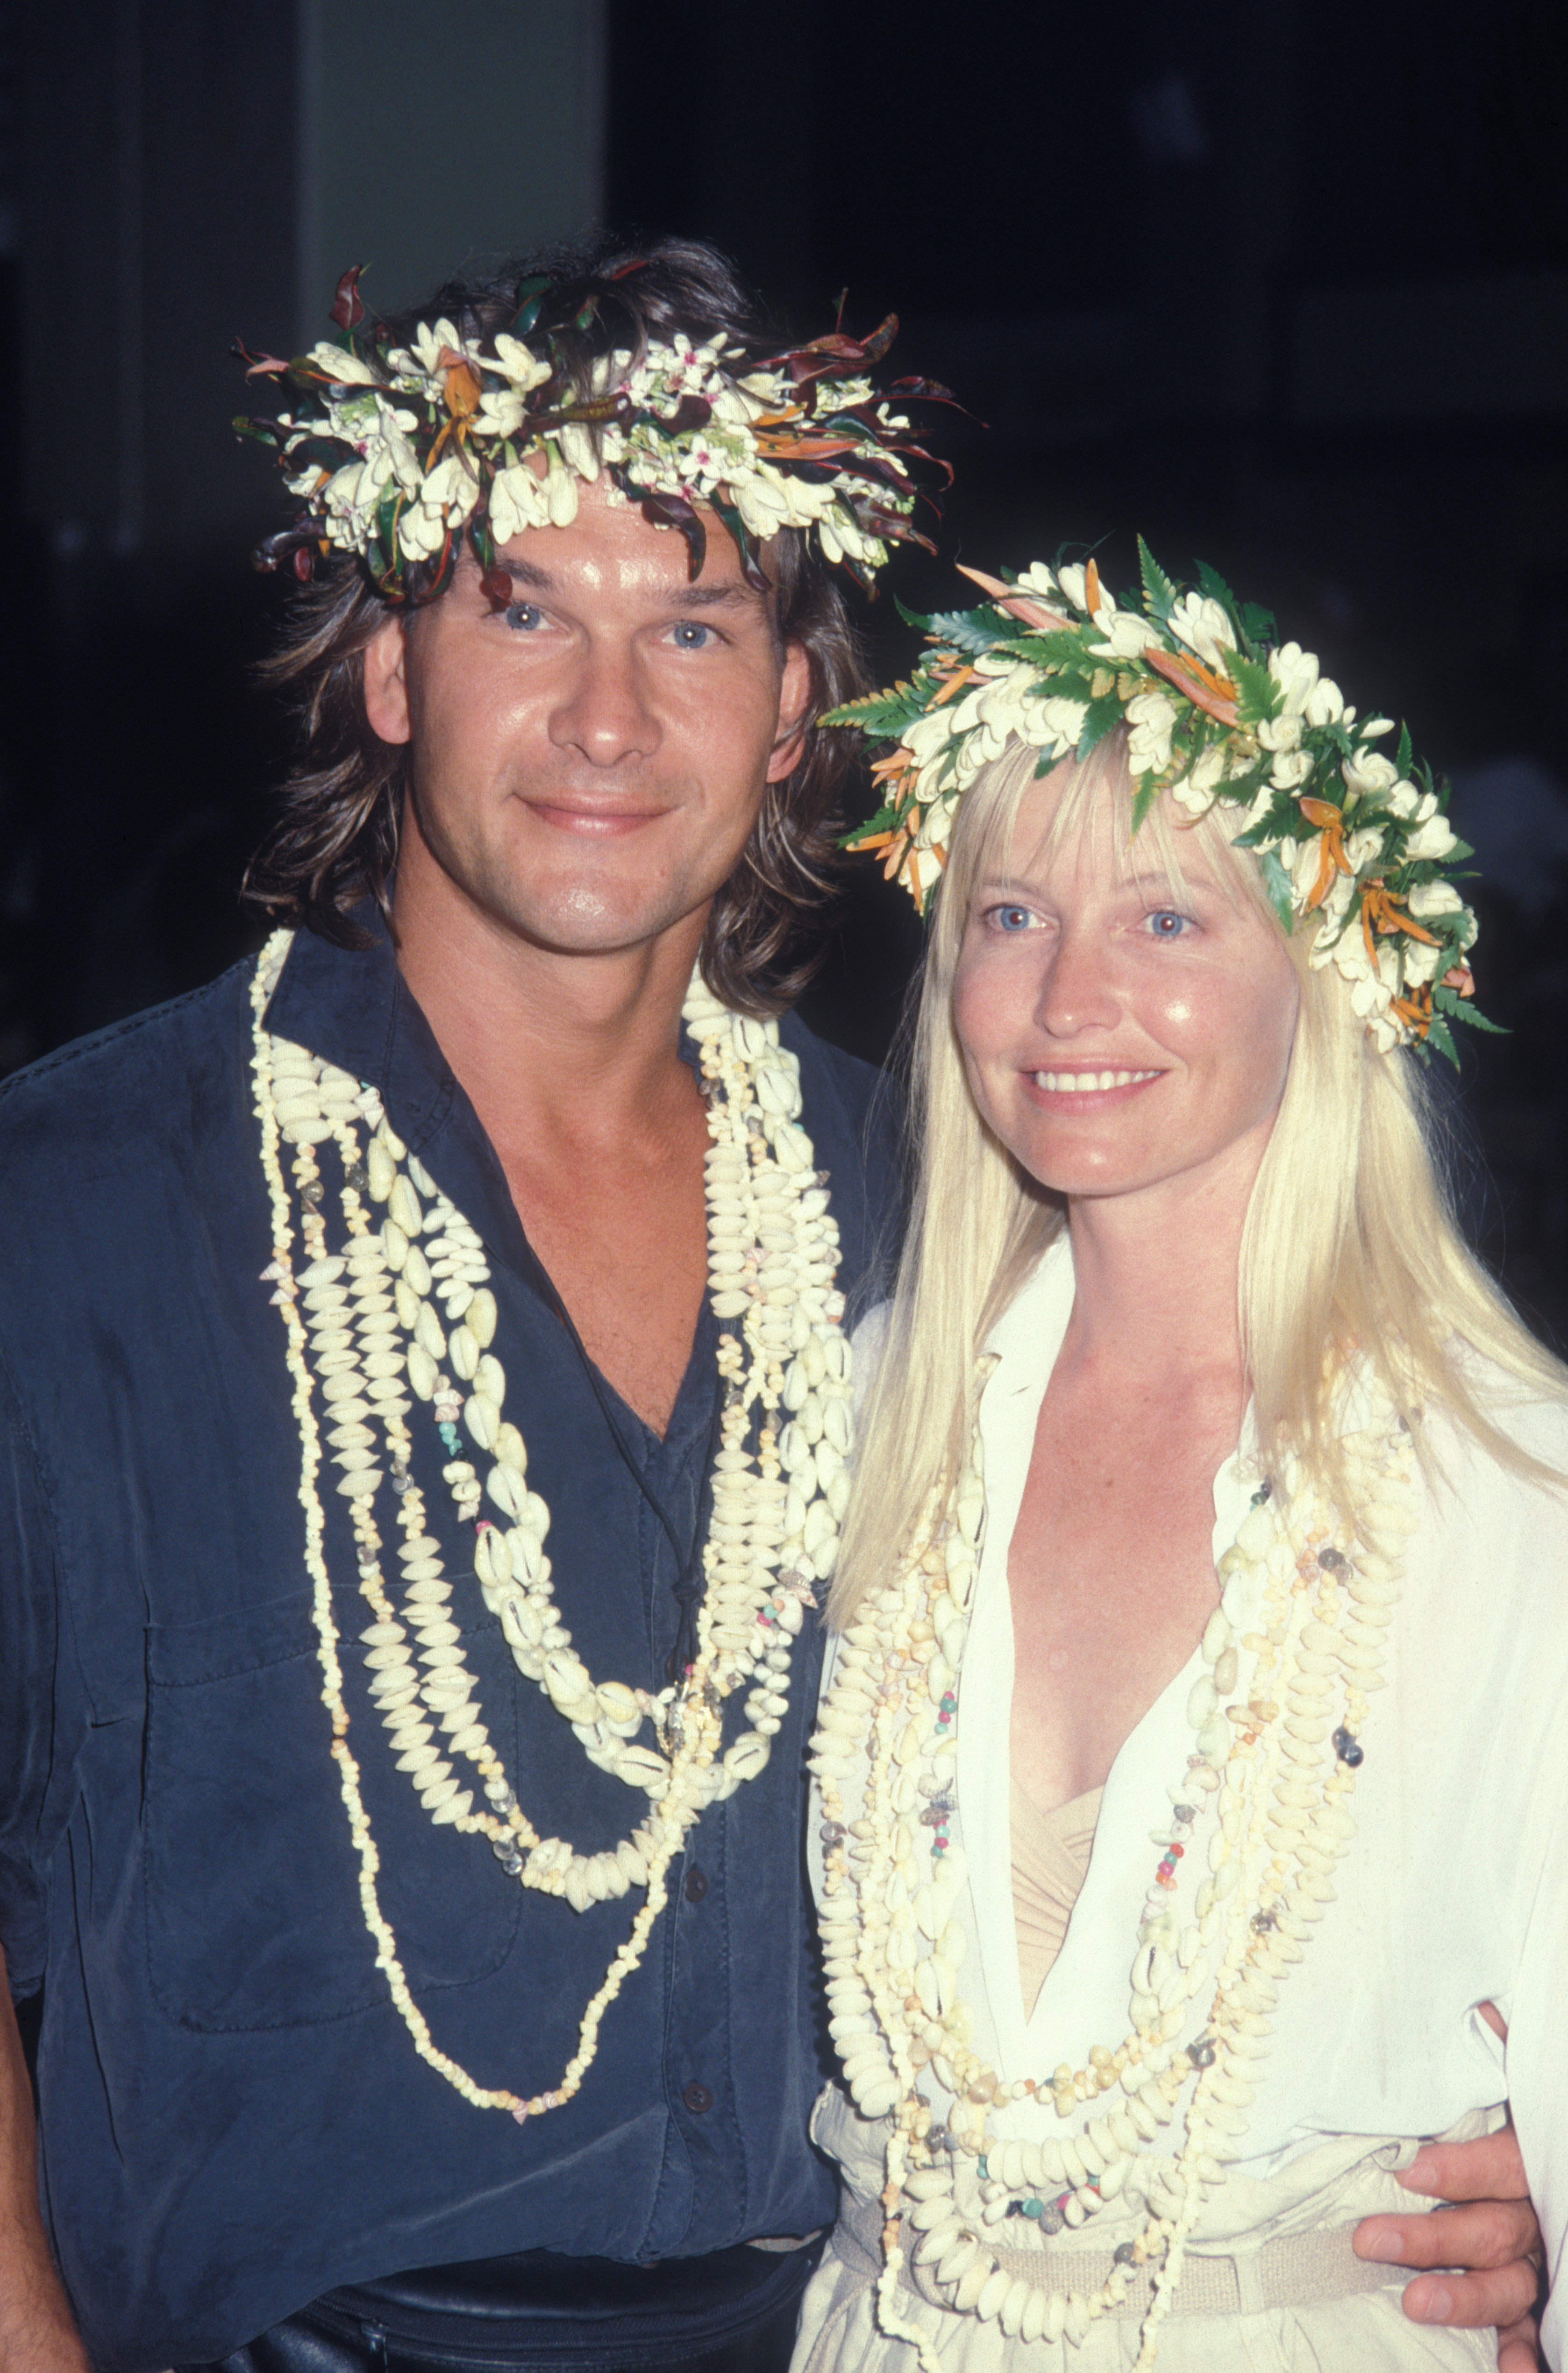 Patrick Swayze and his wife Lisa Niemi photographed in 1989 | Source: Getty Images